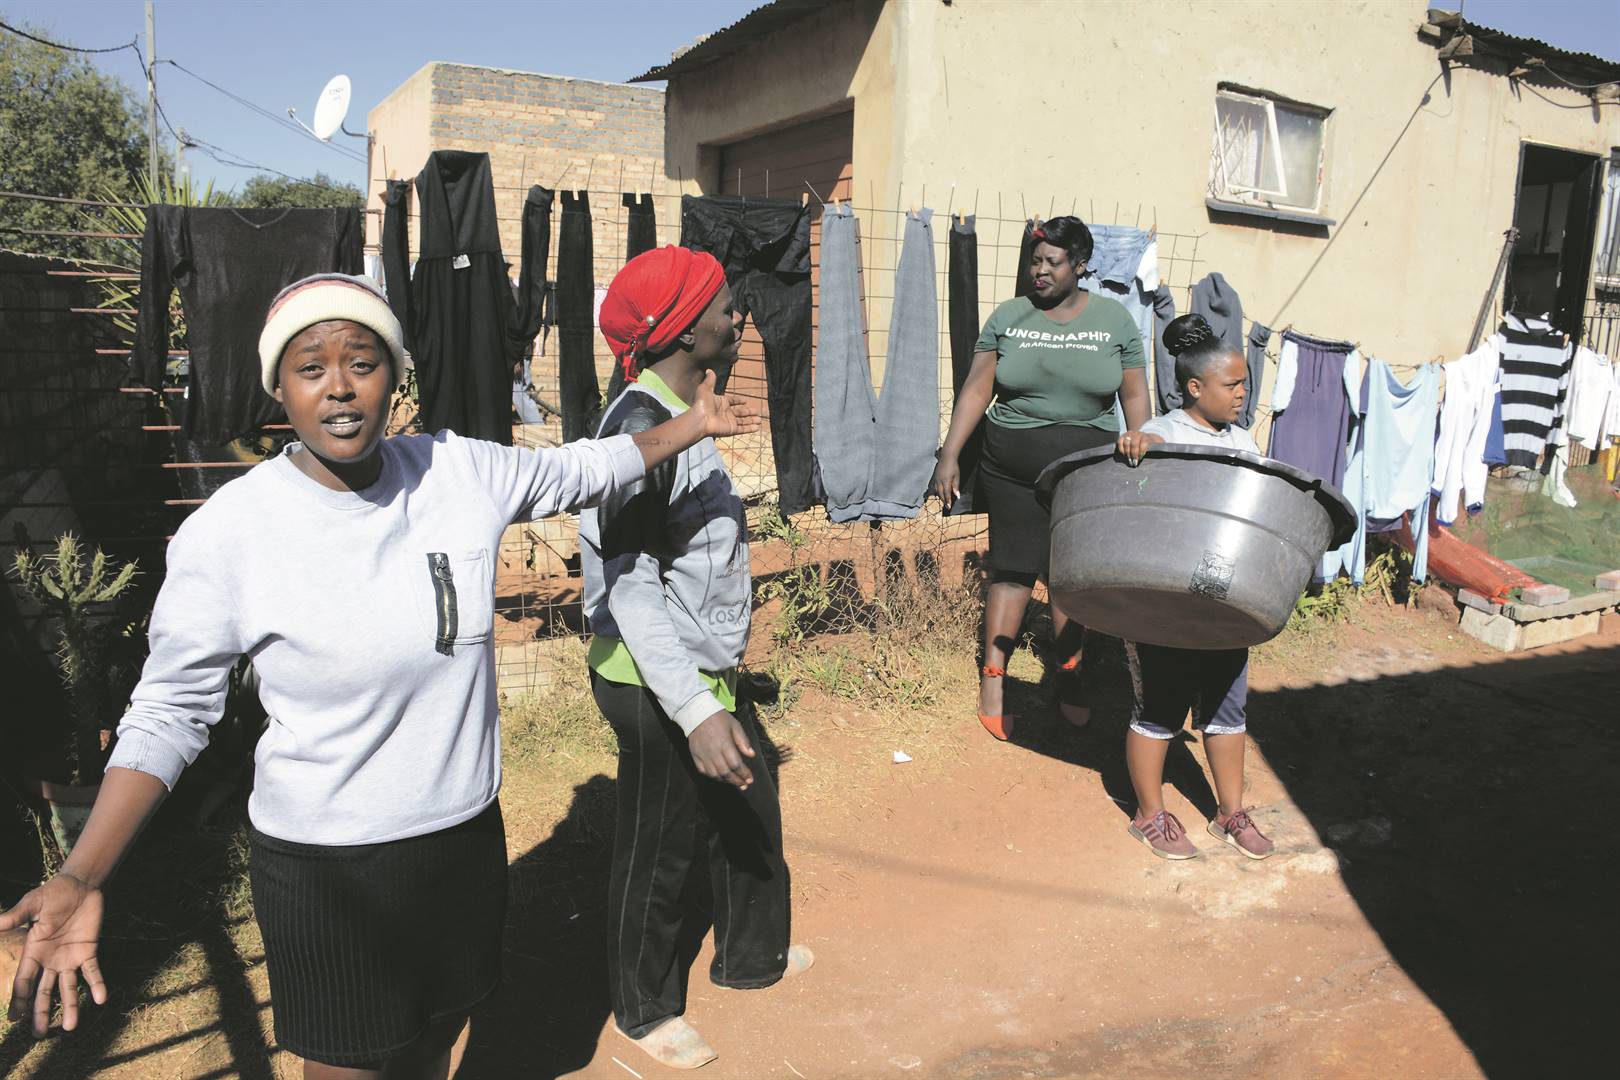 The washing line body guards: Nthabiseng Sello, Sylvia Lekwape, Ntsotiseng Lekhuleni and Lebo Rafuza from Wattvile in Benoni team up to safe guard their washing from being stolen. Photo by Muntu NkosiPhoto by 